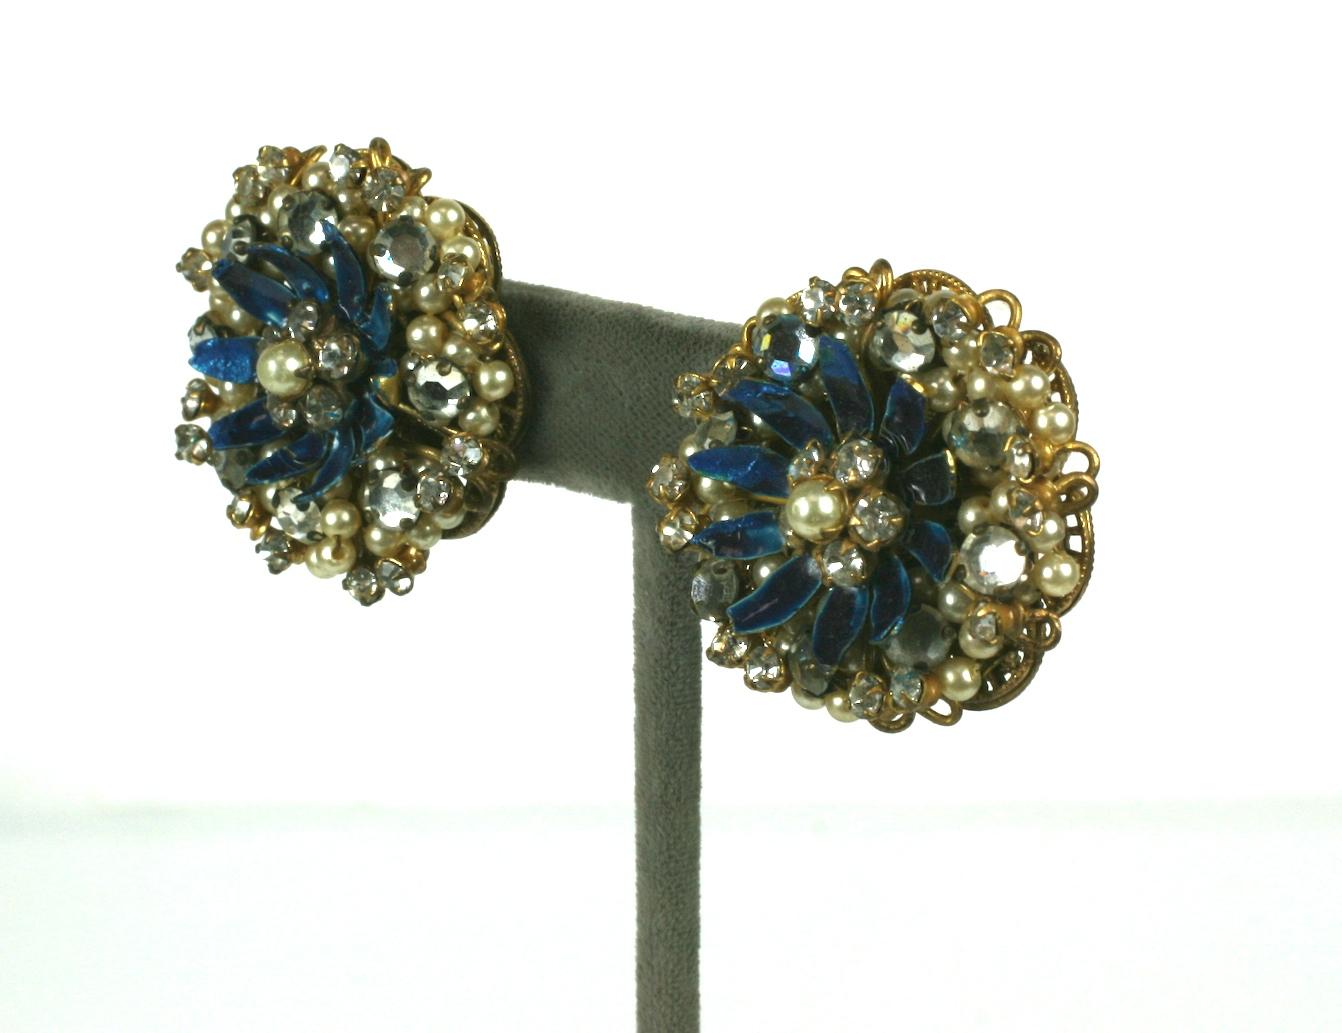 Haskell Style Flower Earrings with deep blue enamel centers. Crystal rose montees and faux pearls are sewn on gilt filigrees a la Haskell but these are more likely produced by Robert of New York.  1940's USA.
1.25